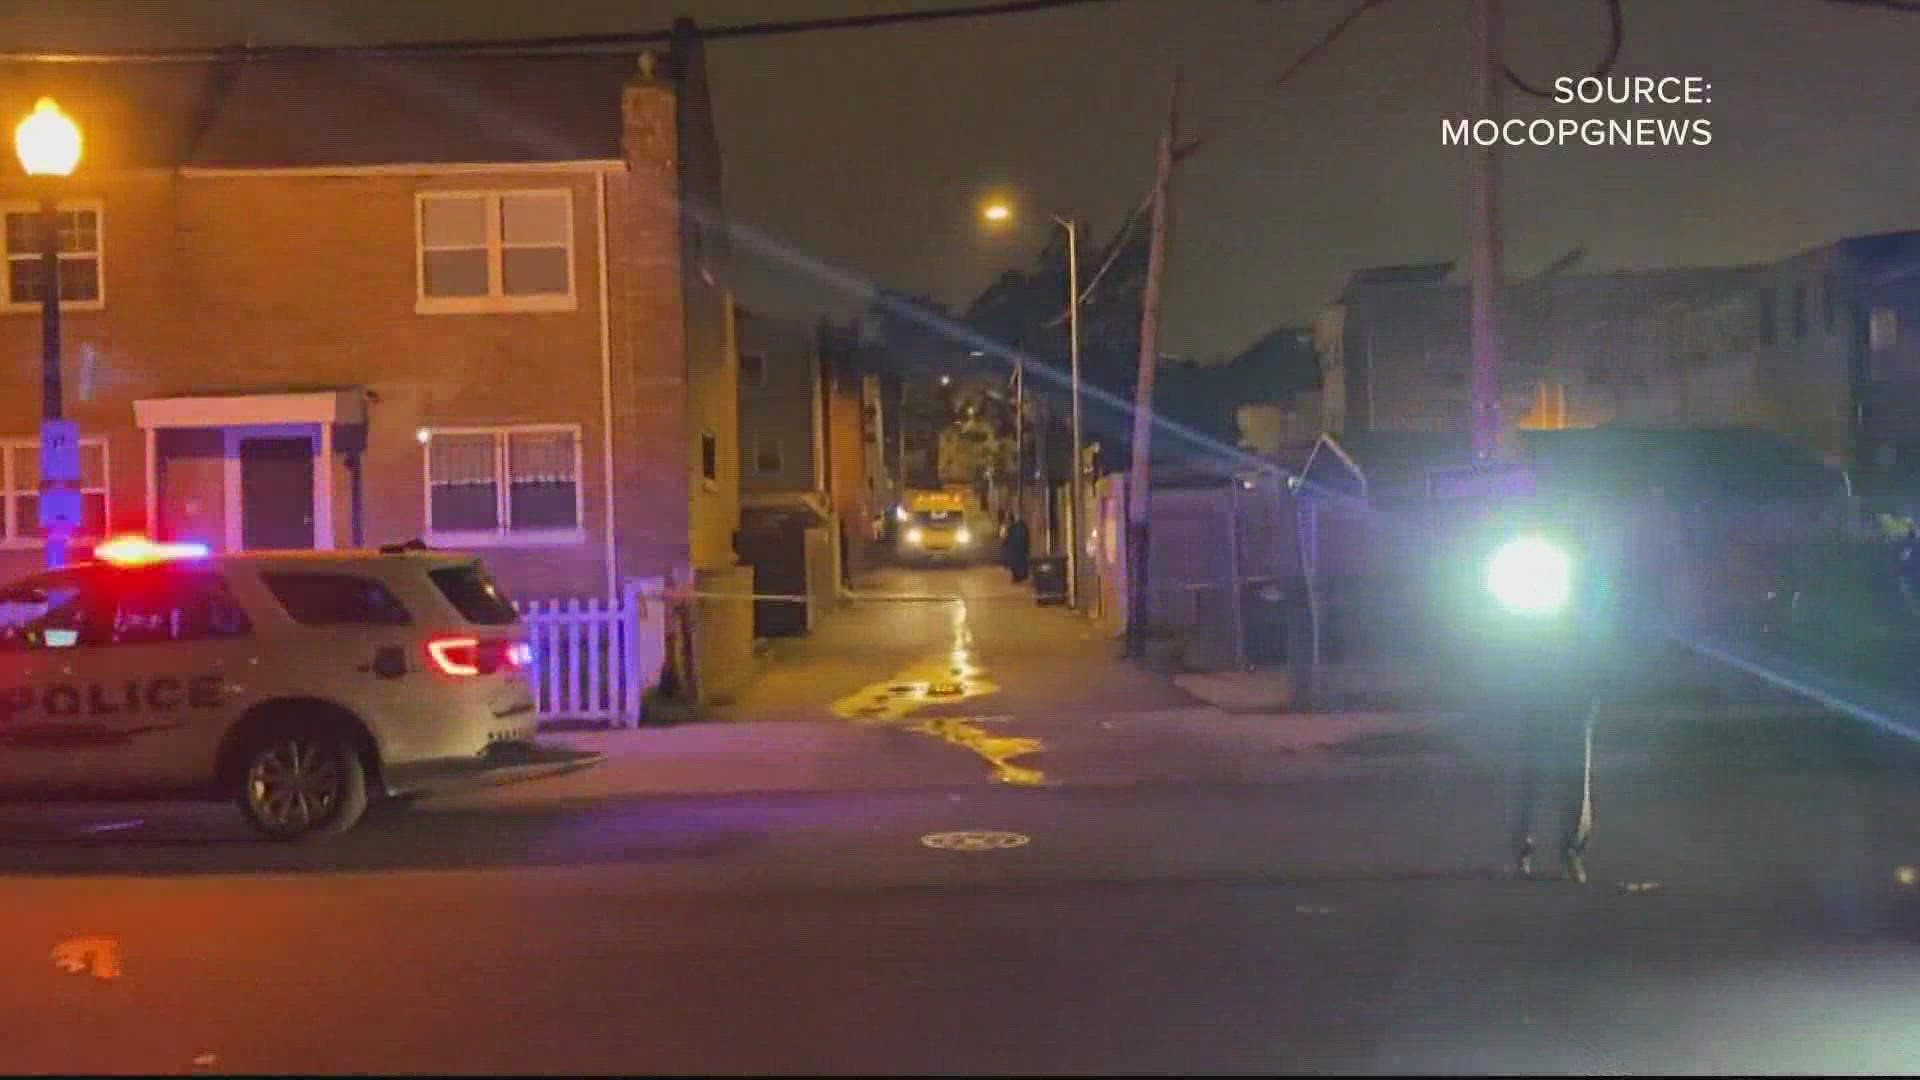 Christine Chase was killed Friday in the 1200 block of Raum Street in Northeast DC, Metropolitan Police Department say.